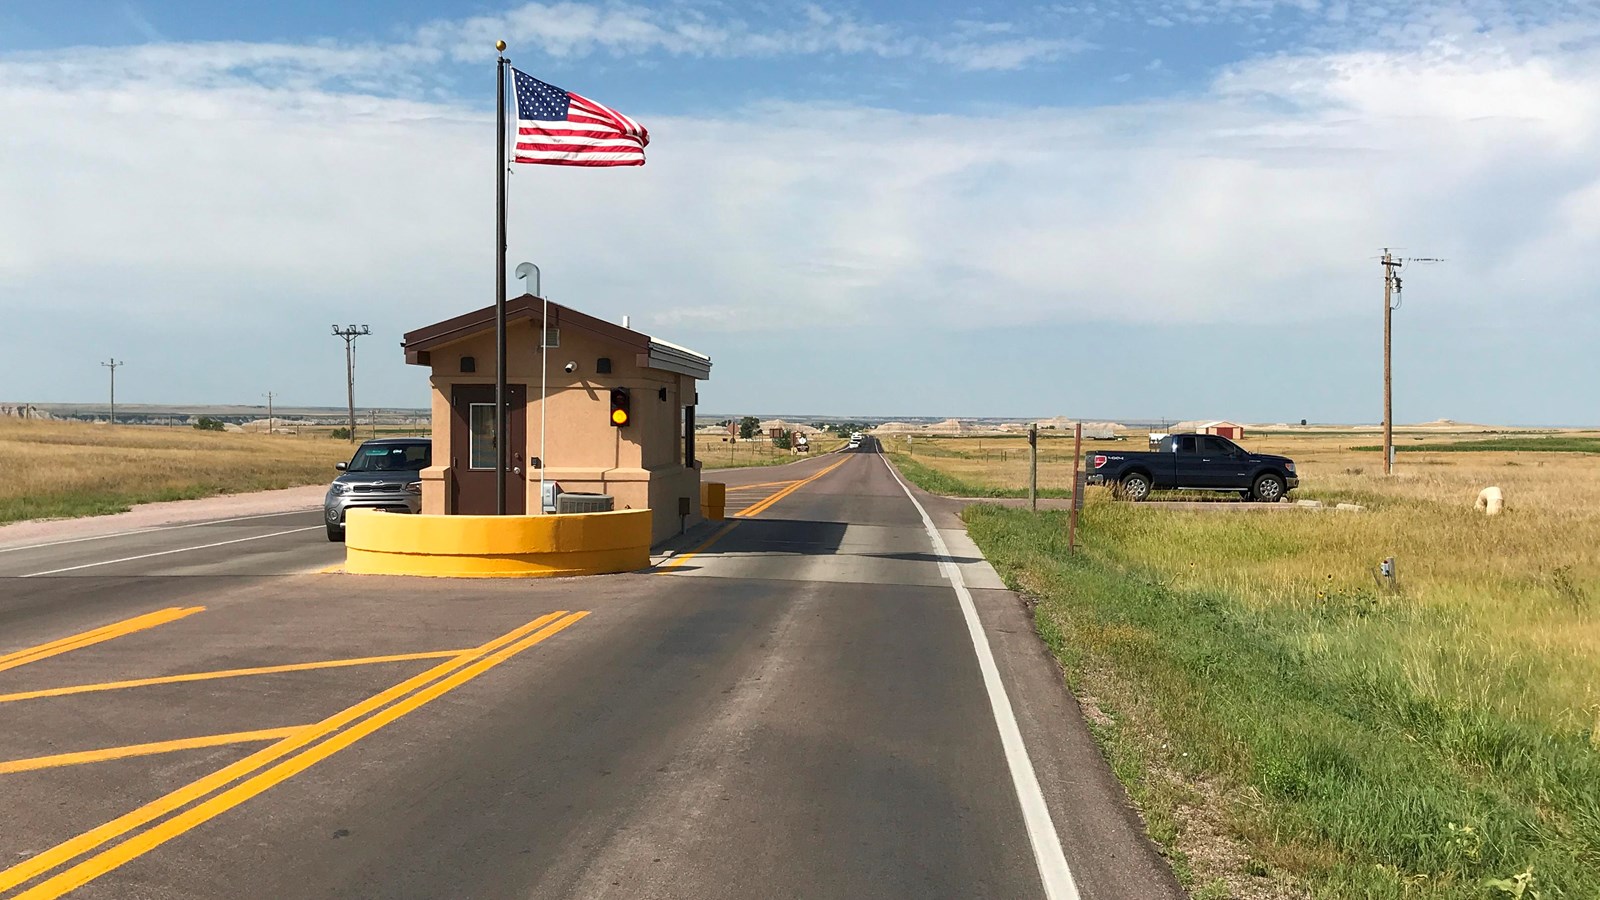 Single tan building in the middle of a paved road with USA flag under a blue sky.